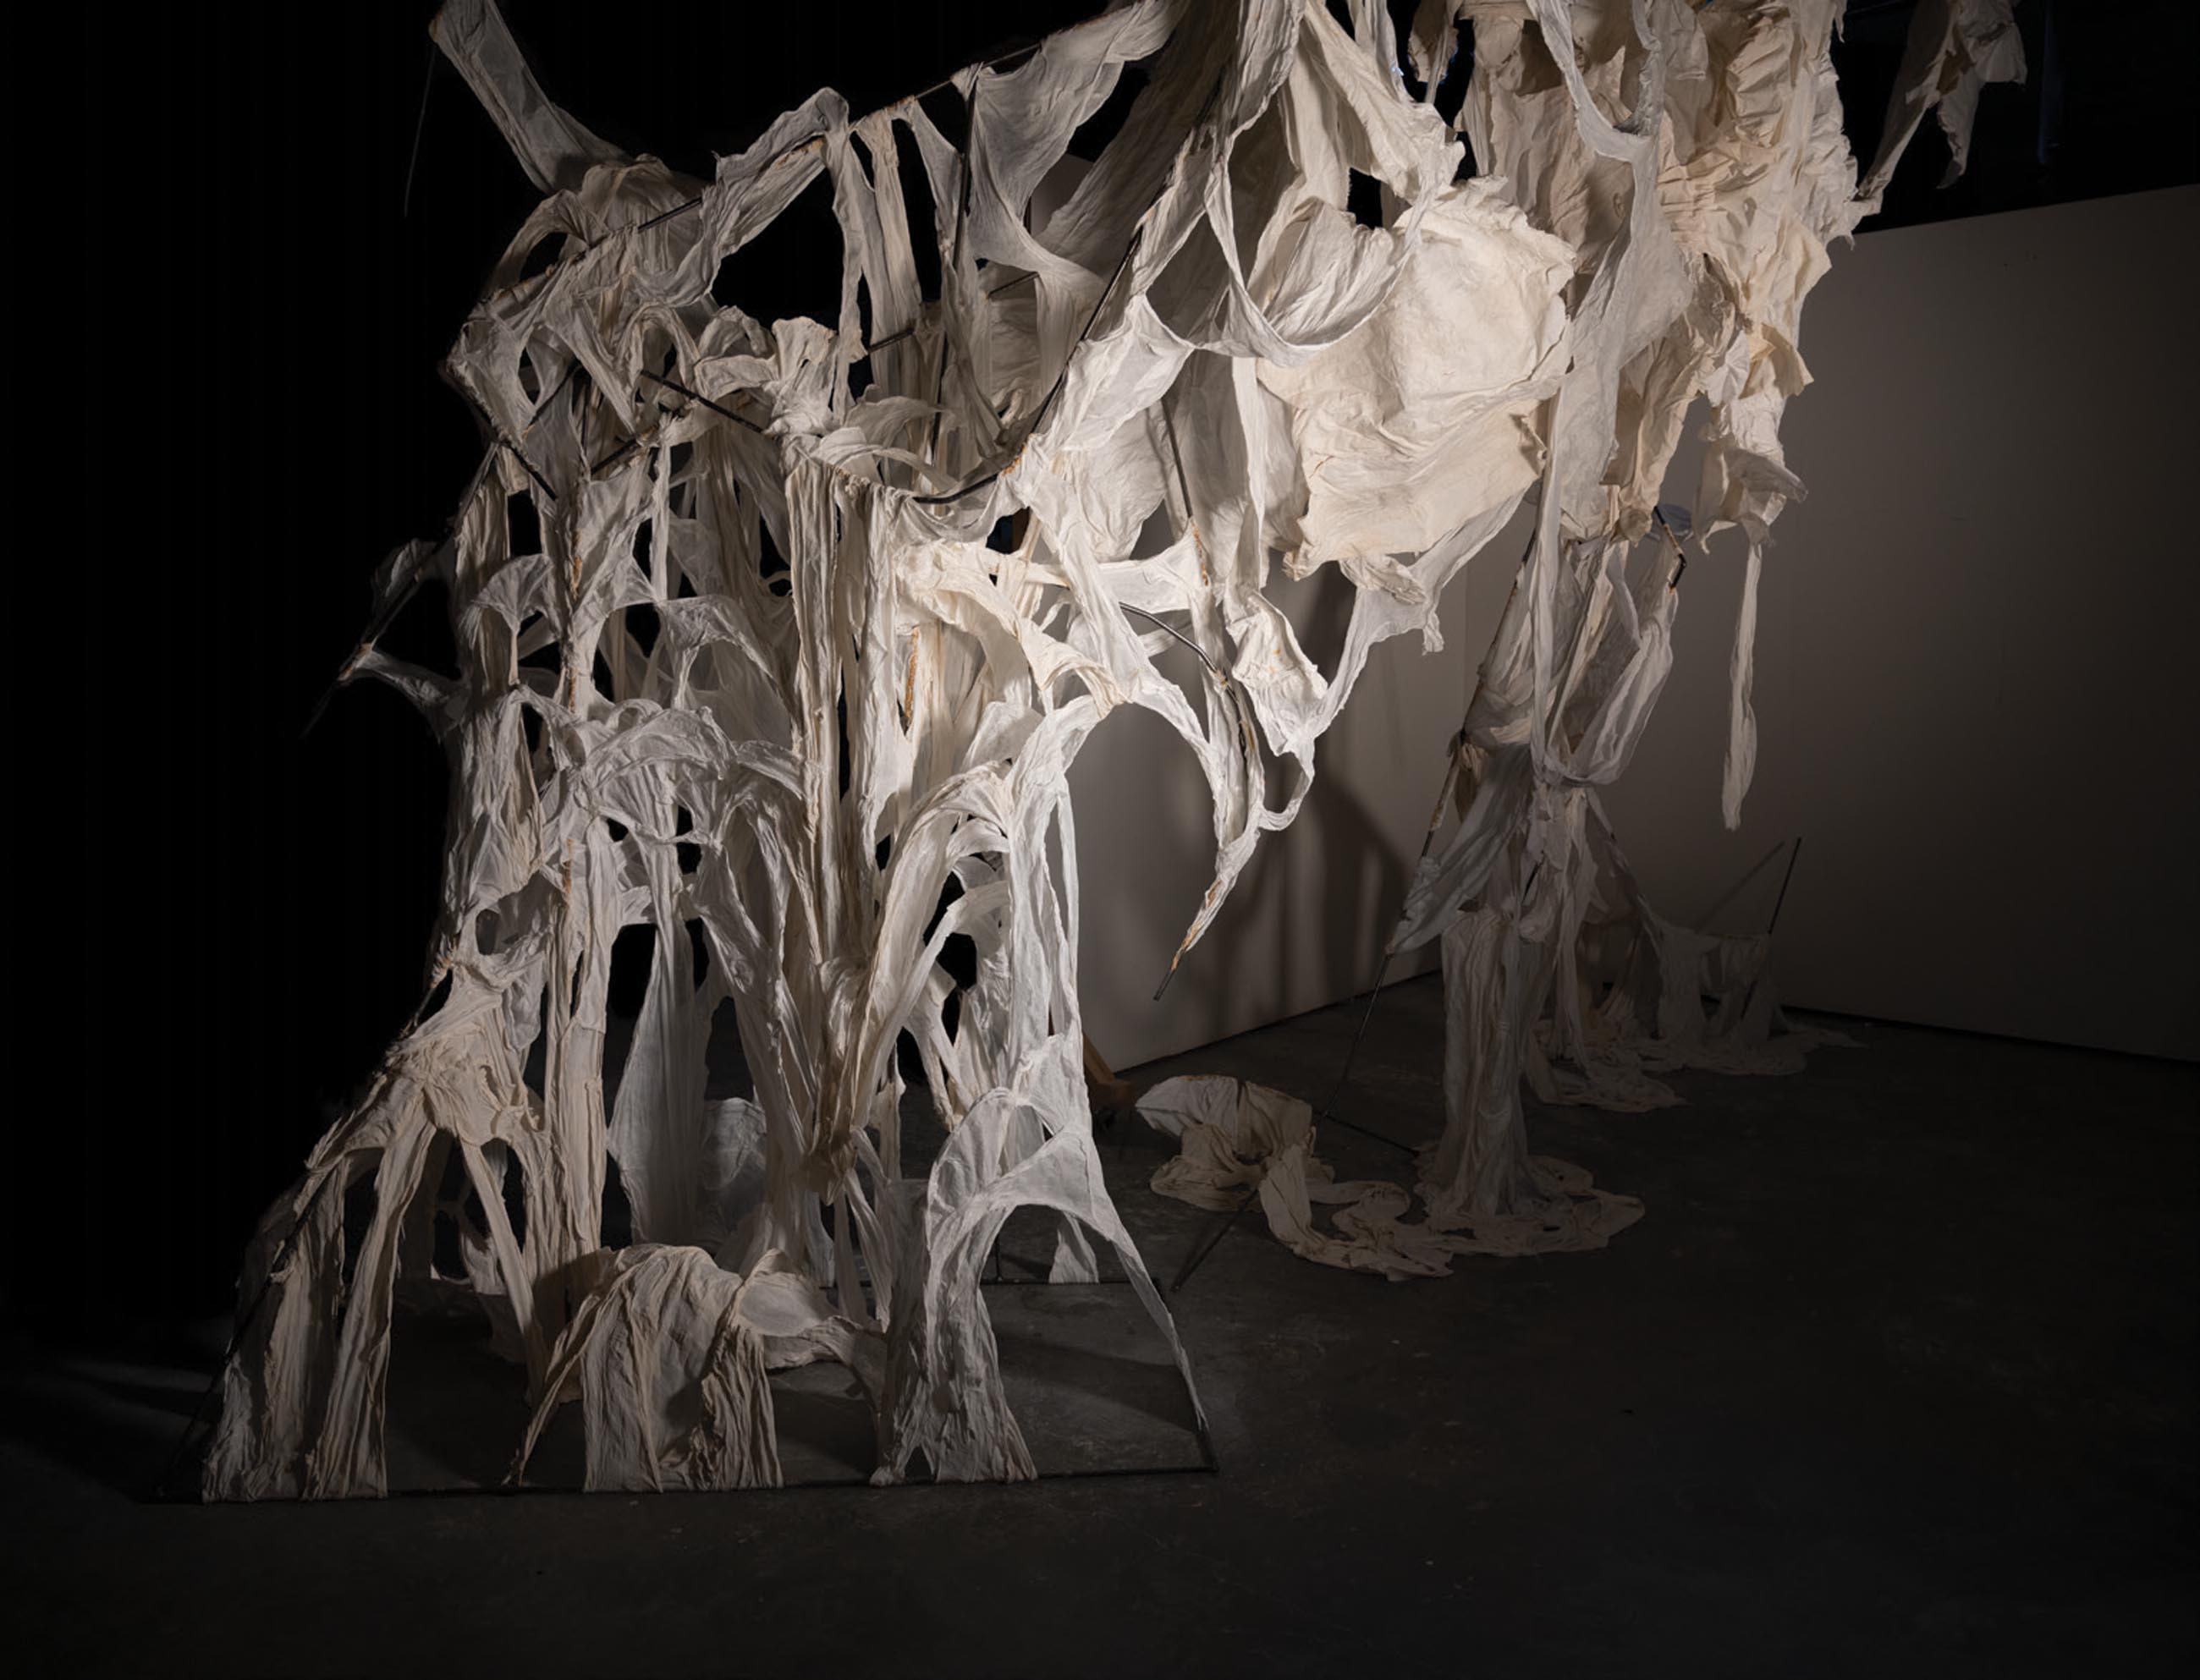 strands and shreds of ivory colored fabric hang suspended in a shadowy space